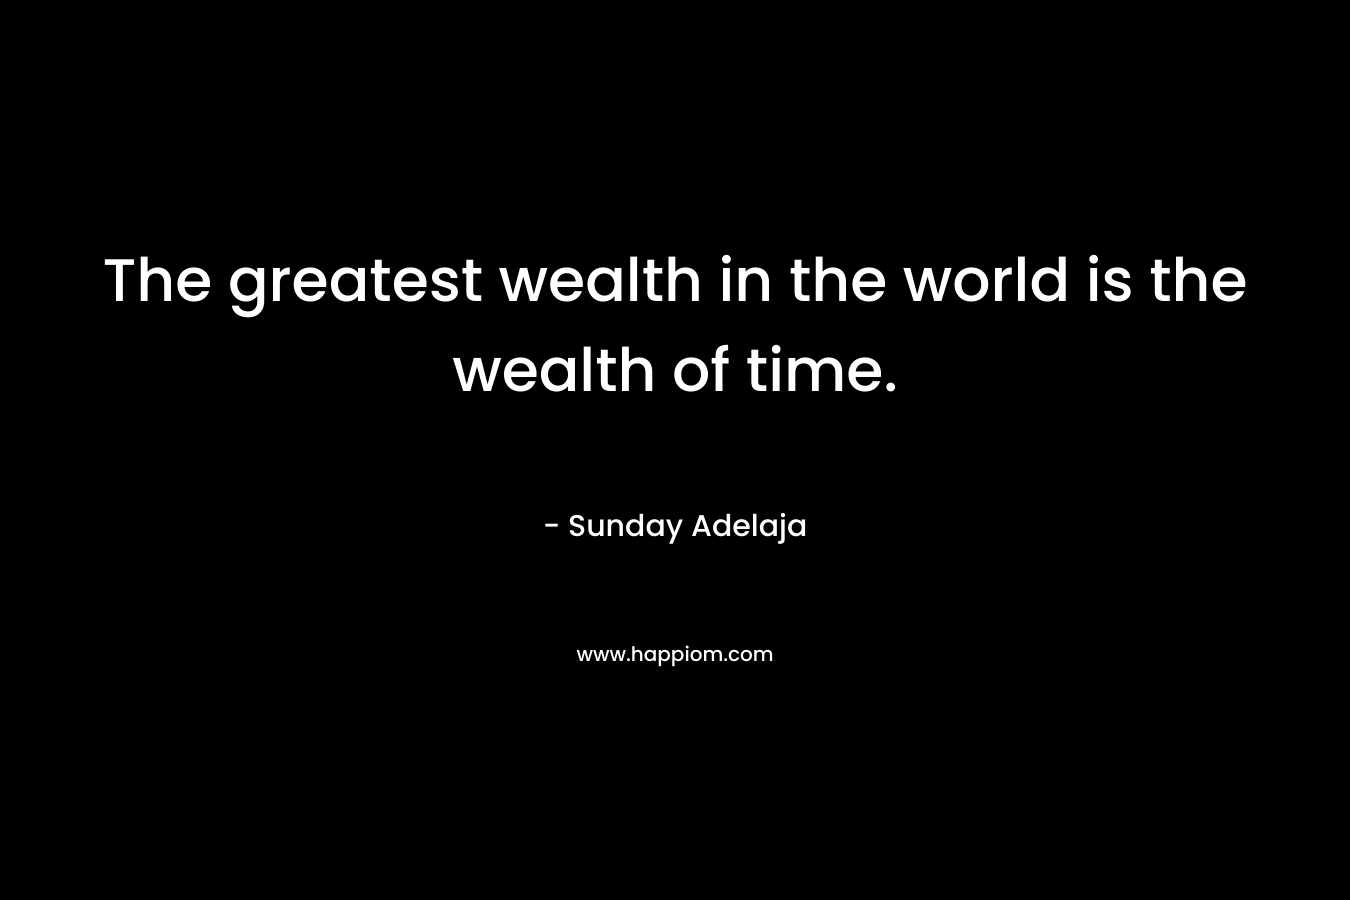 The greatest wealth in the world is the wealth of time.